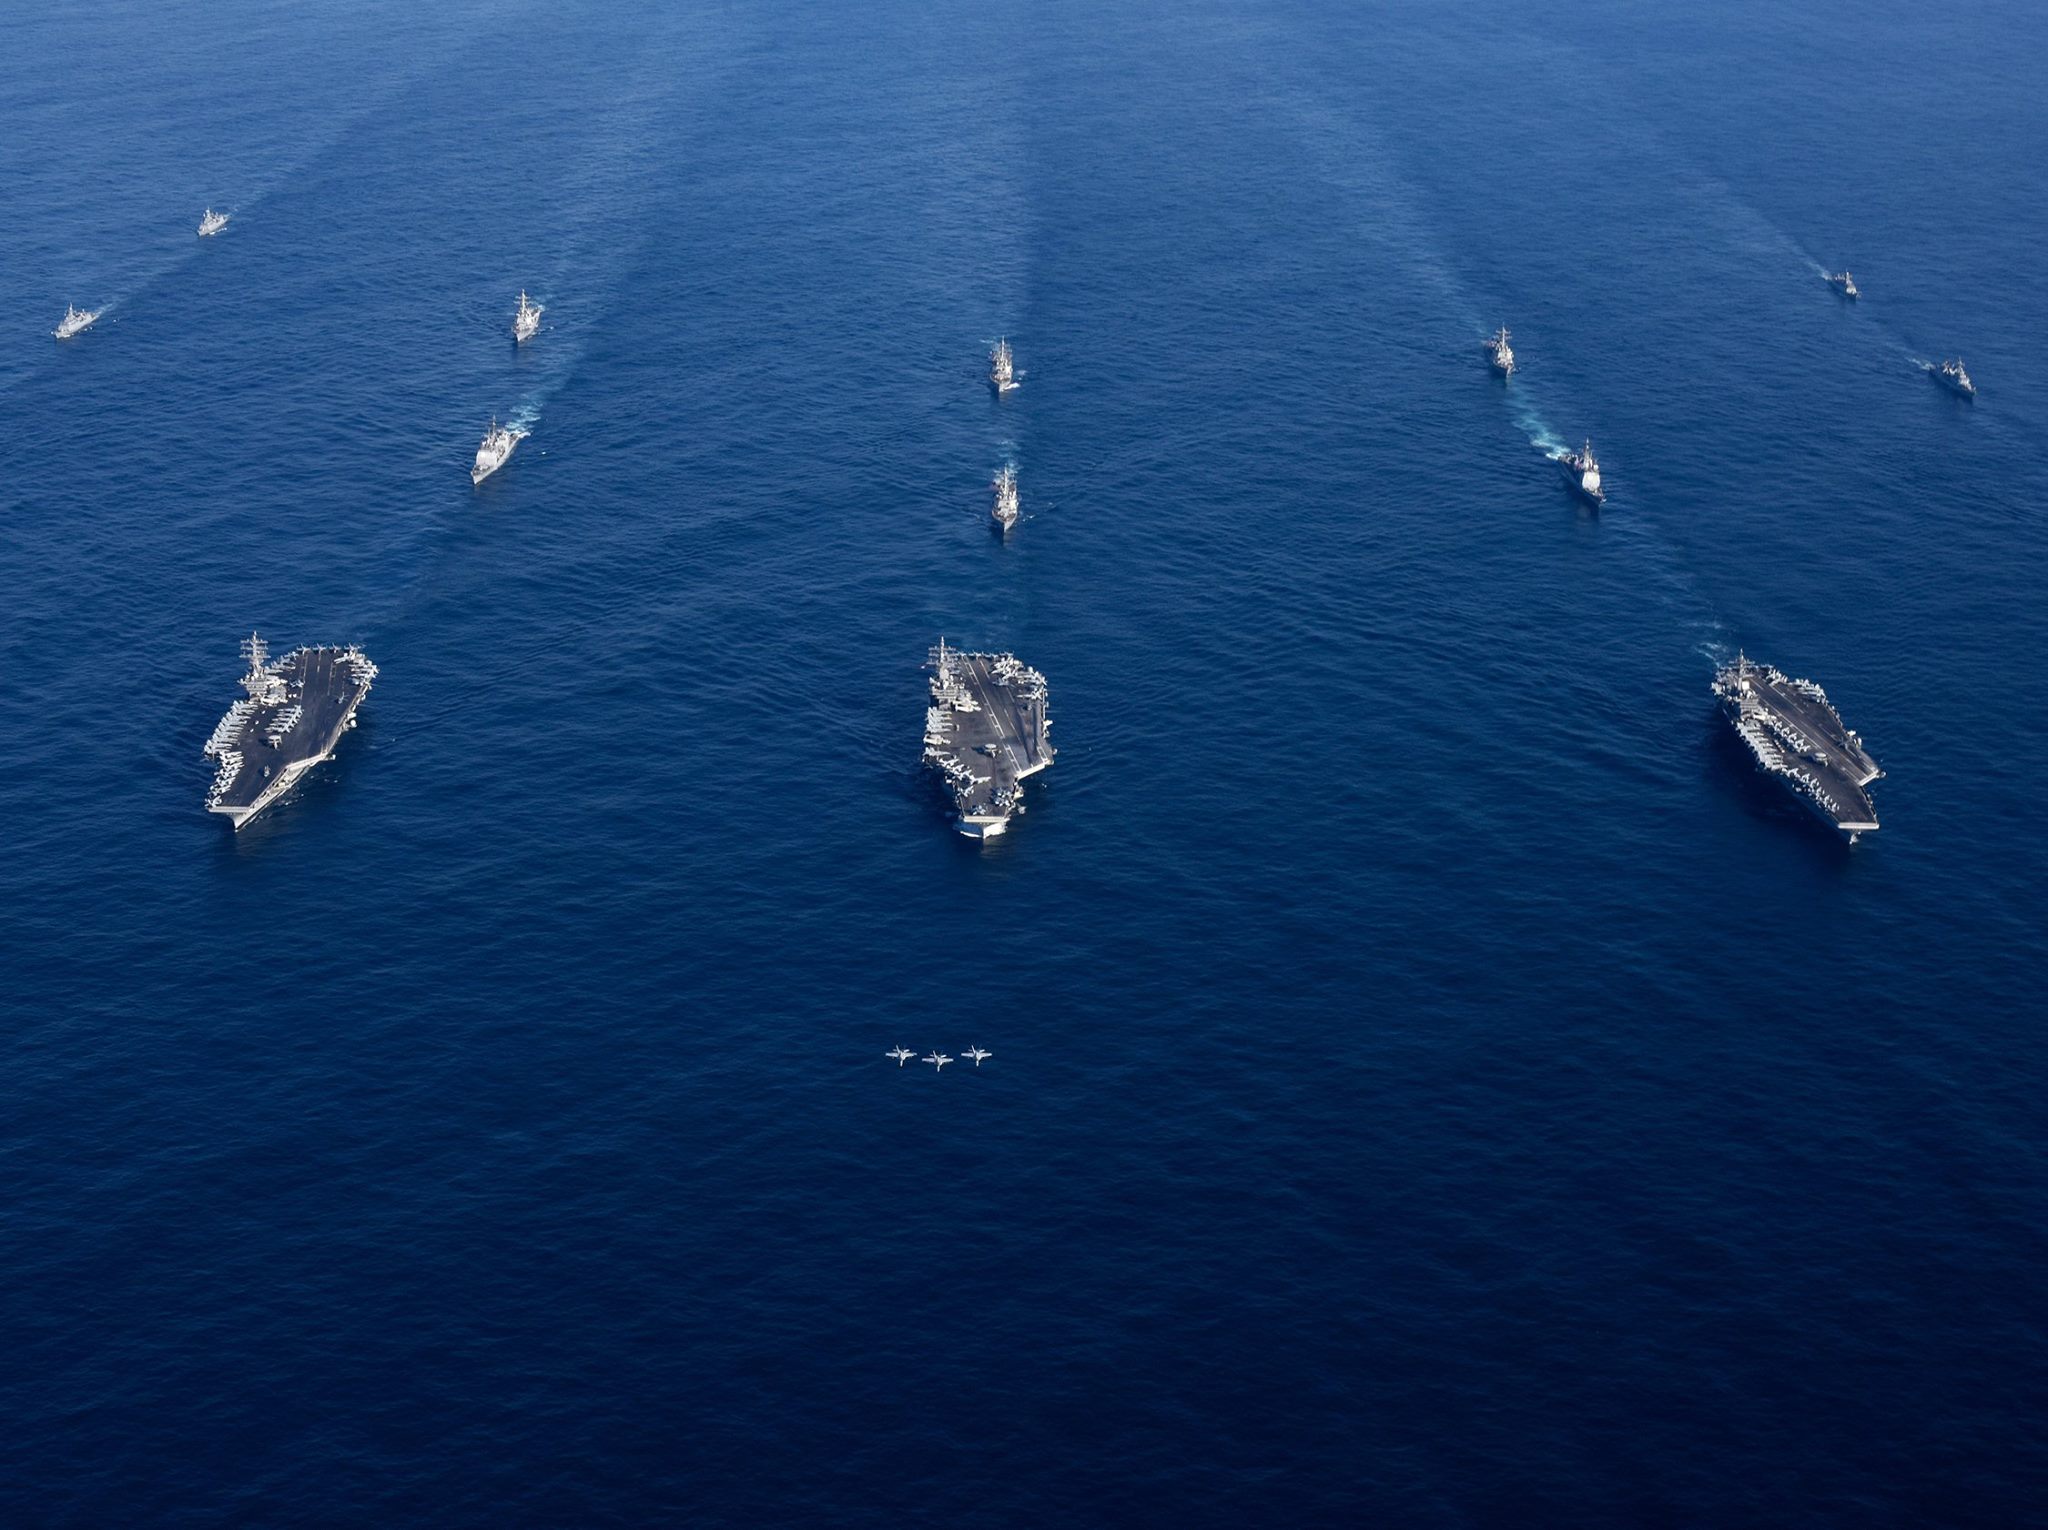 These Are The Images Of Three U.S. Supercarriers In Formation You&#39;ve Been Waiting For